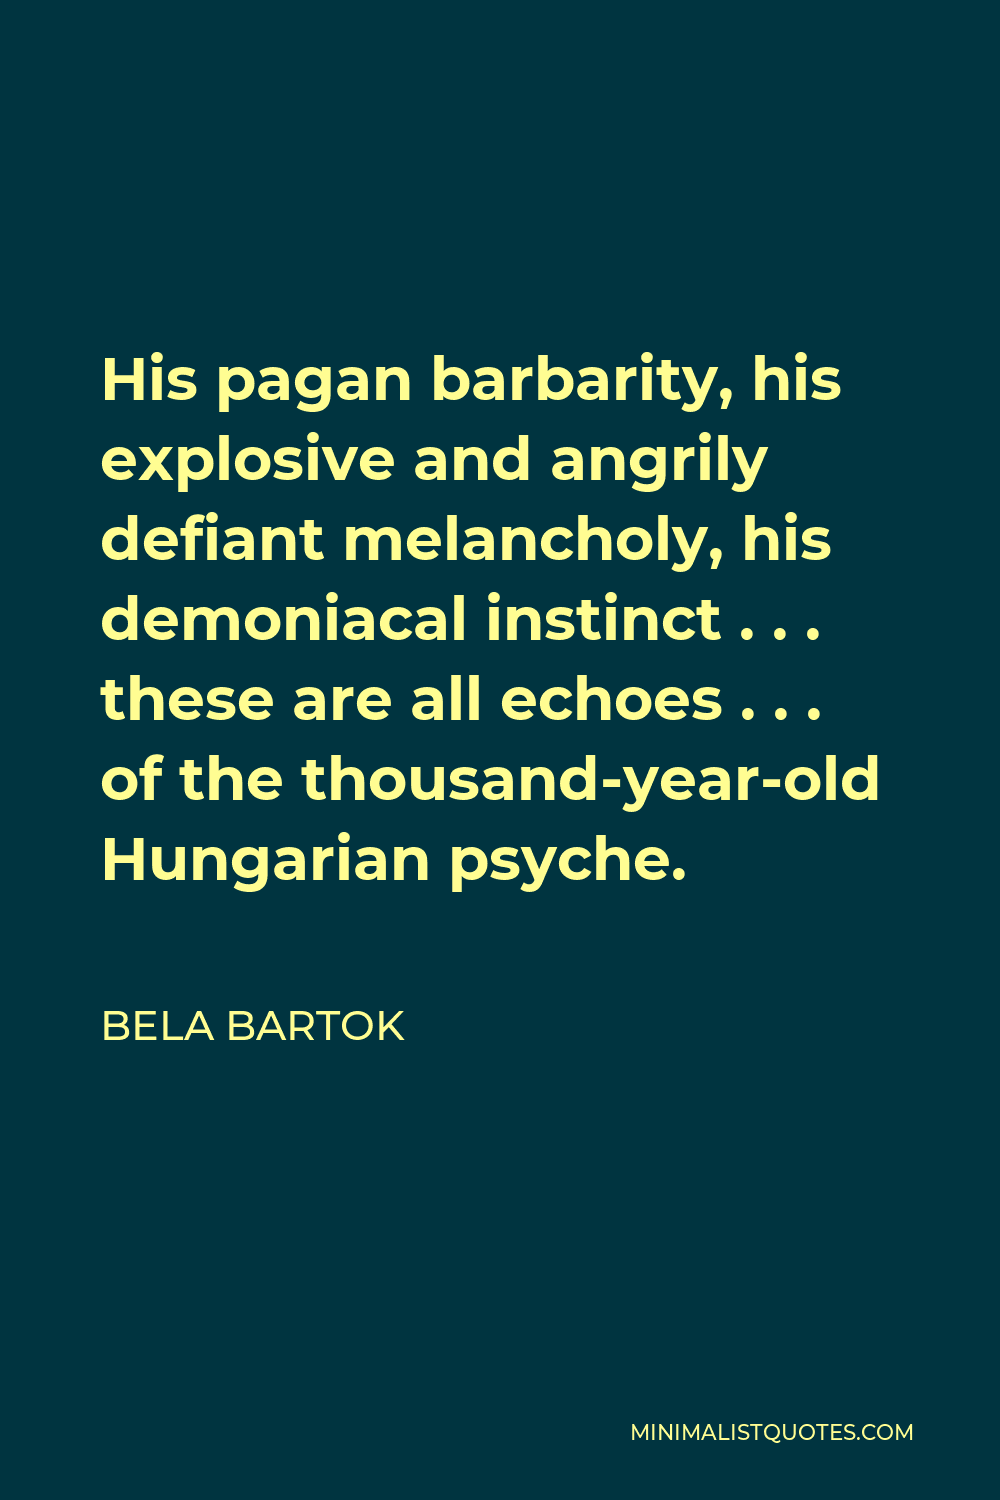 Bela Bartok Quote - His pagan barbarity, his explosive and angrily defiant melancholy, his demoniacal instinct . . . these are all echoes . . . of the thousand-year-old Hungarian psyche.